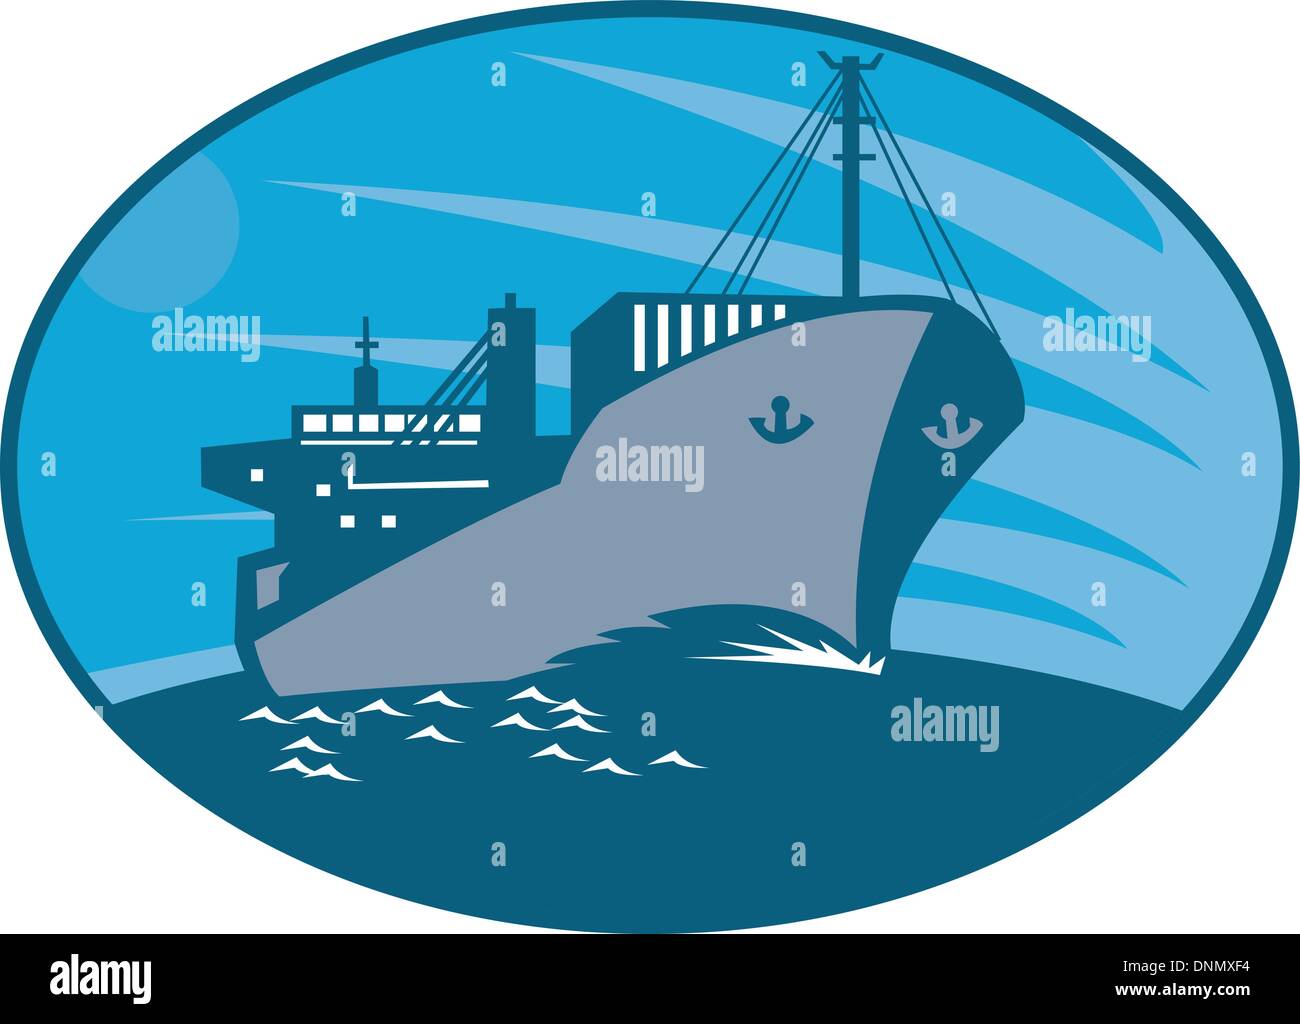 Illustration of a container cargo freighter ship sailing on sea done in retro style set inside ellipse. Stock Vector